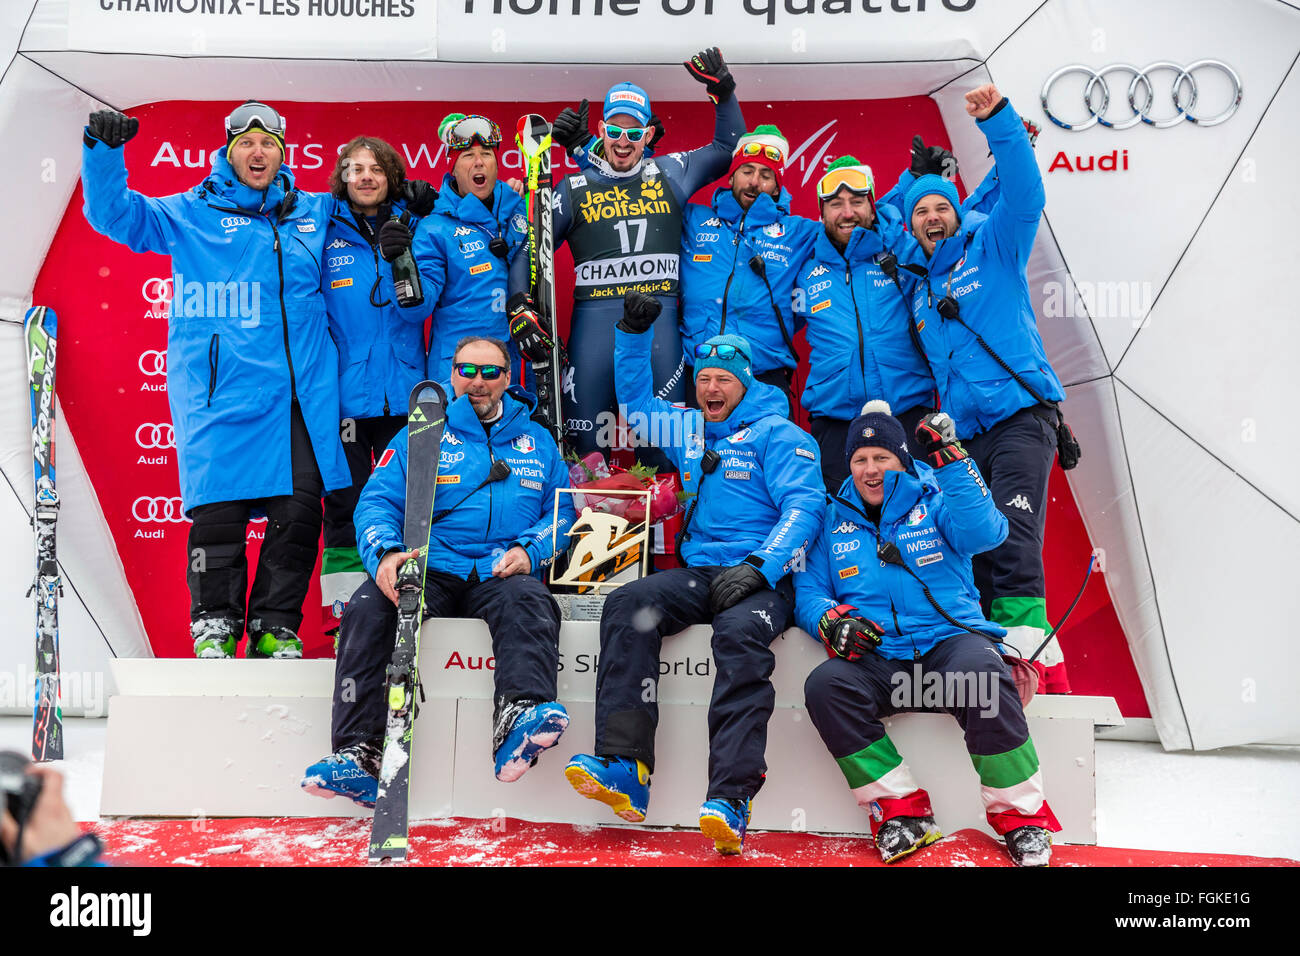 Chamonix, France. 20th February, 2016. The Italian ski team celebrates the victory of Dominik PARIS in Chamonix. The Audi FIS World Cup 9th Men's Downhill took place in Chamonix France with a 'jour blanc' (grey skies and flat light) and some light snow. The podium was - 1- PARIS Dominik (ITA) 1:58.38 2- NYMAN Steven (USA) 1:58.73 3- FEUZ Beat (SUI) 1:58.77 AUDI FIS SKI WORLD CUP 2015/16 Credit:  Genyphyr Novak/Alamy Live News Stock Photo